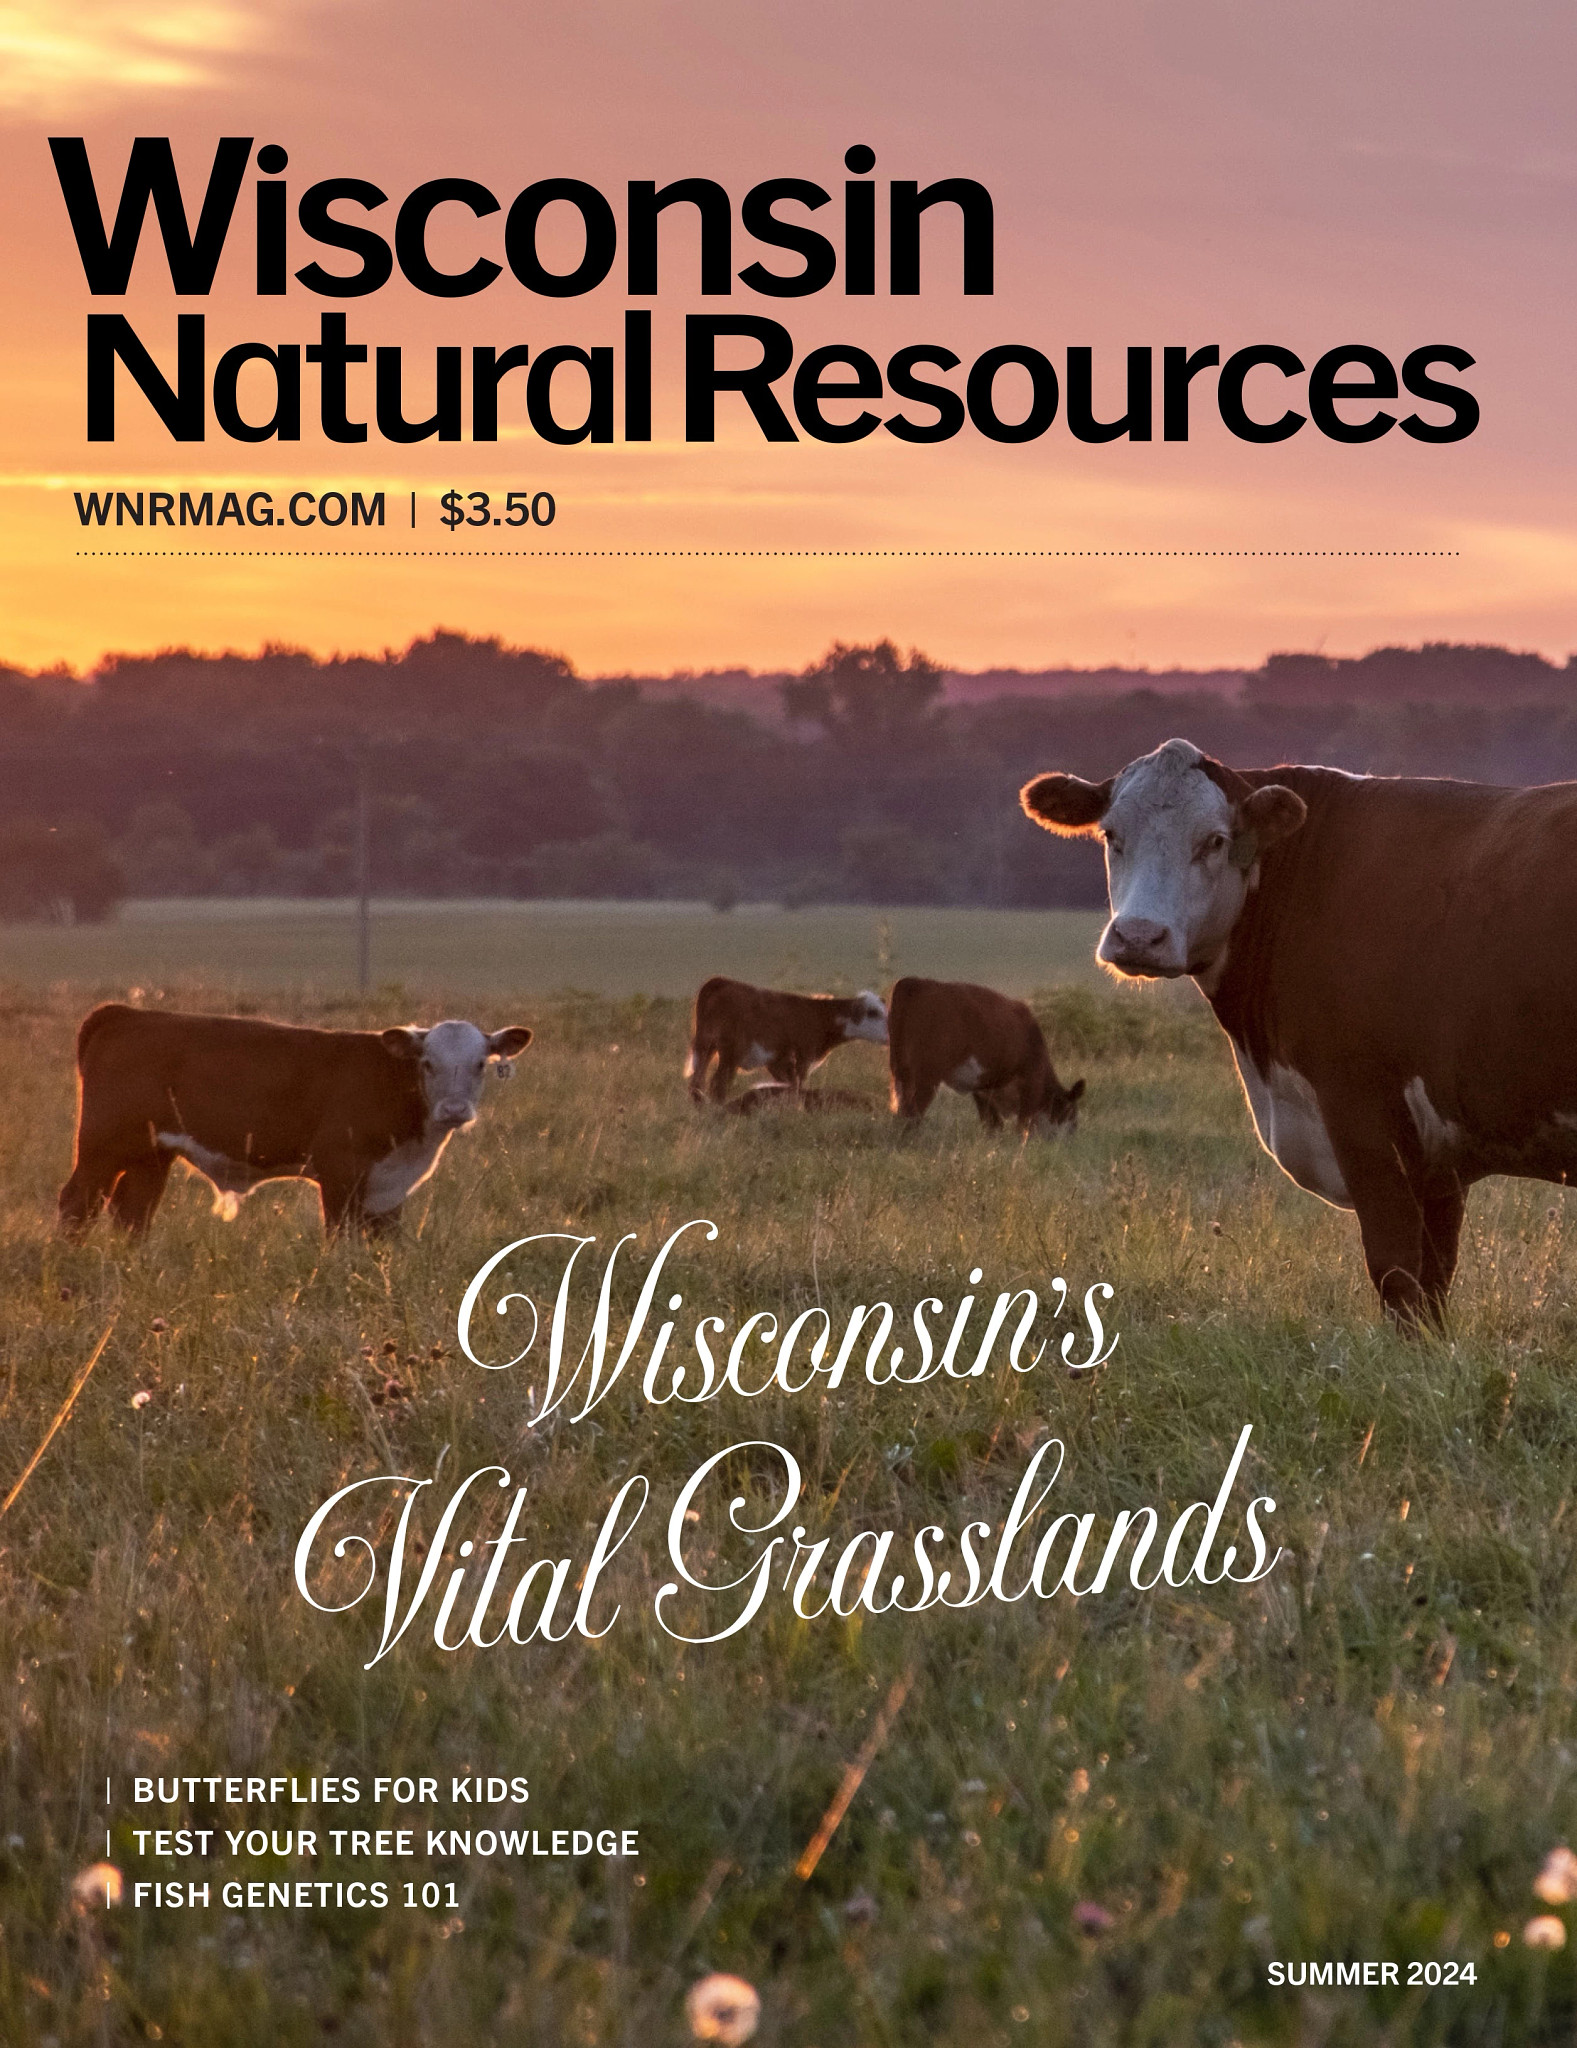 front cover of summer wisconsin natural resources showing image of cows grazing in a field with words "wisconsin's vital grasslands"